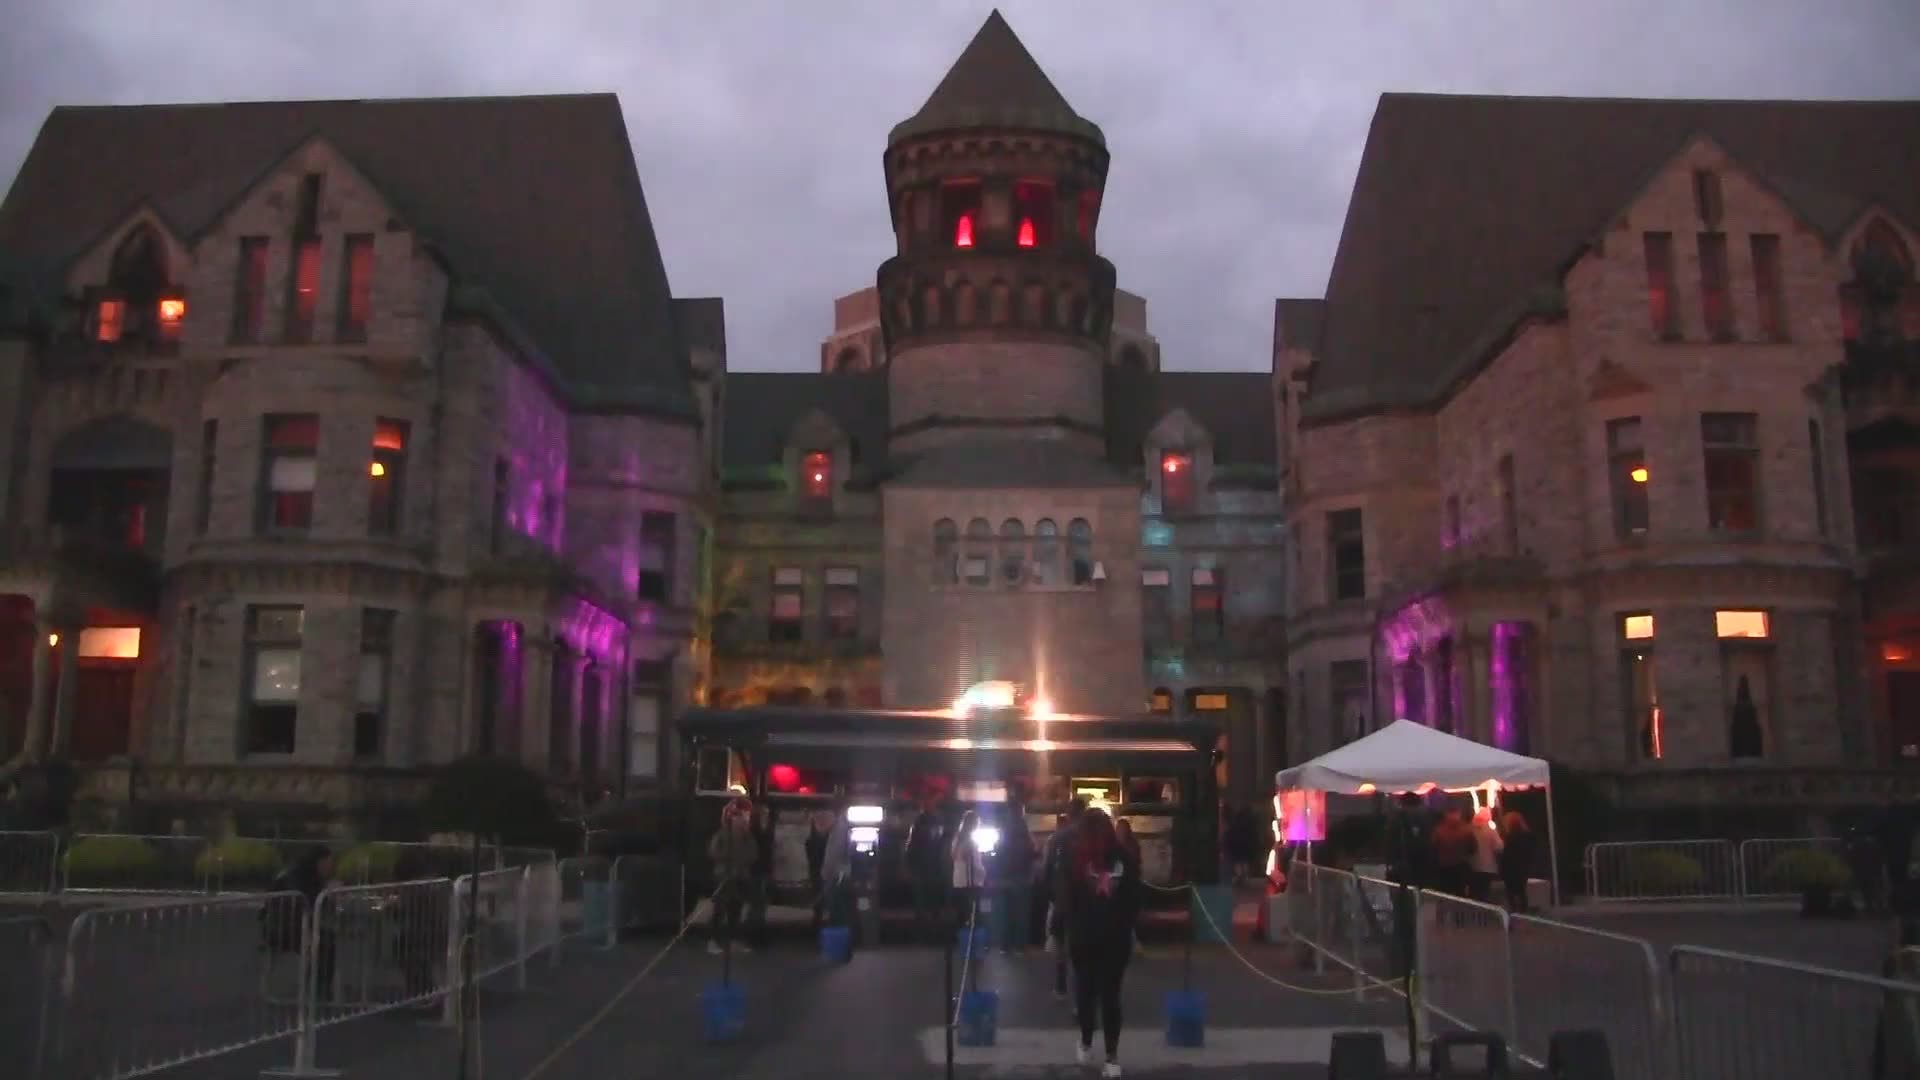 It's known as one of Ohio's most haunted locations, and every Halloween the infamous Mansfield Reformatory ramps up its scares with Blood Prison.